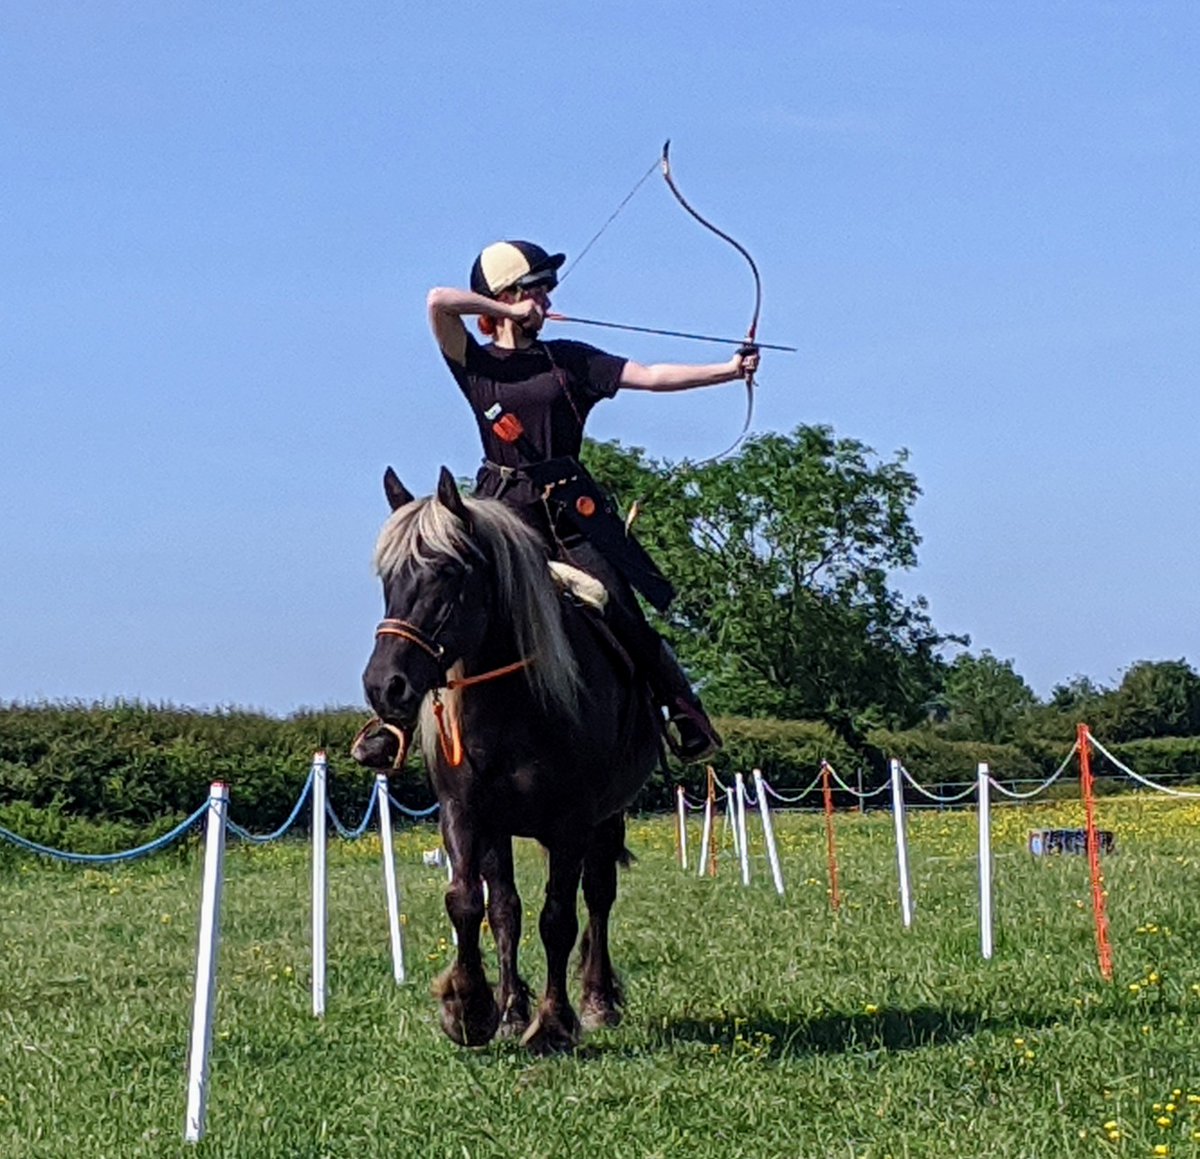 Someone was full of beans yesterday, settled down to some archery in the end though! #horsebackarchery #training #comtois #lively #horse #springgrass